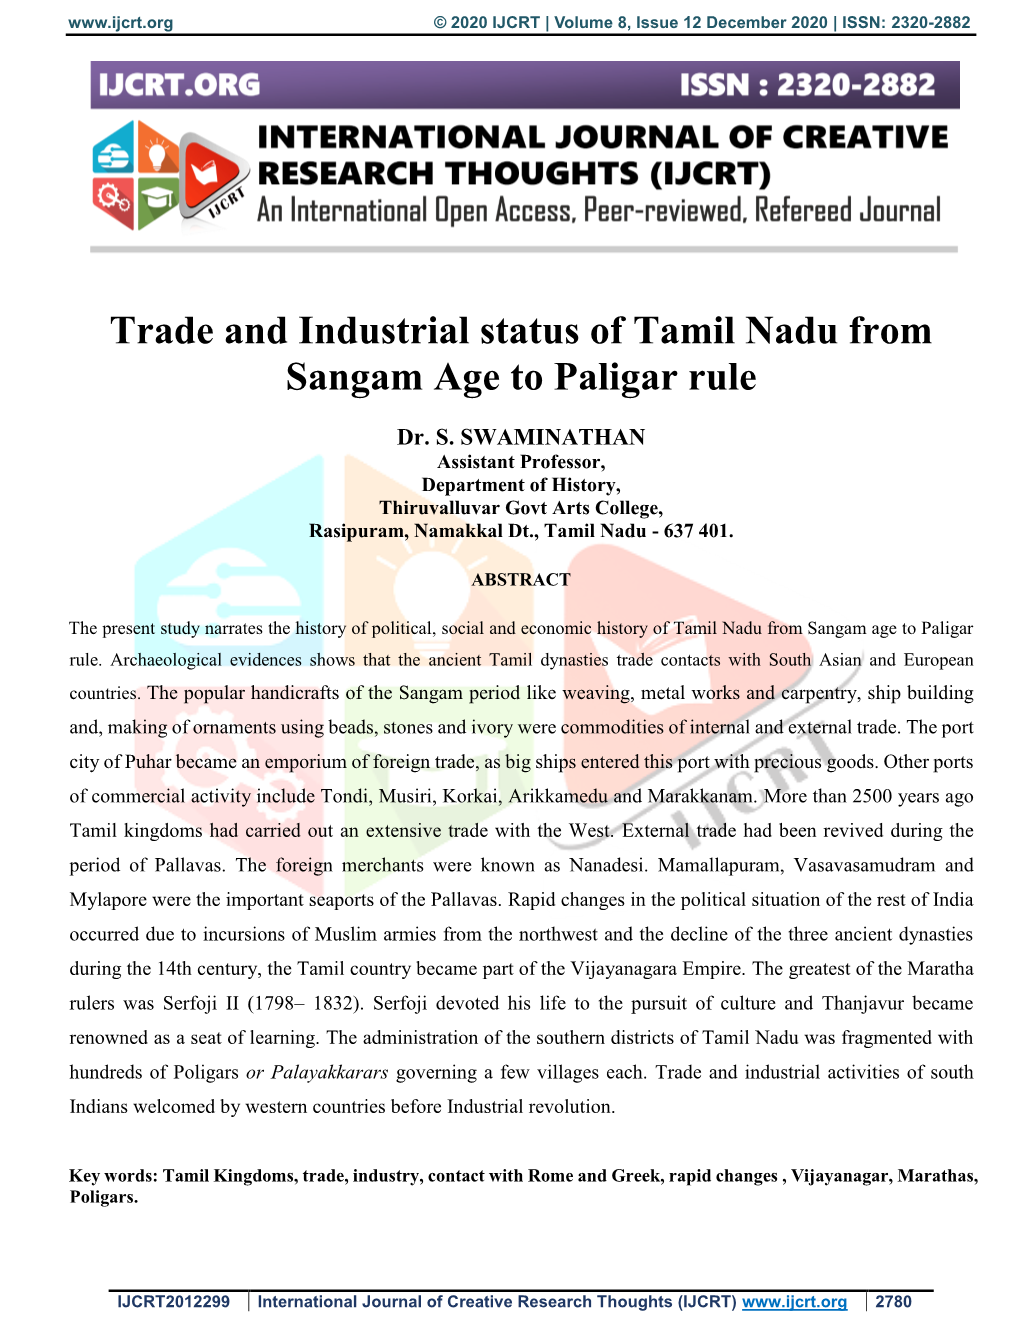 Trade and Industrial Status of Tamil Nadu from Sangam Age to Paligar Rule